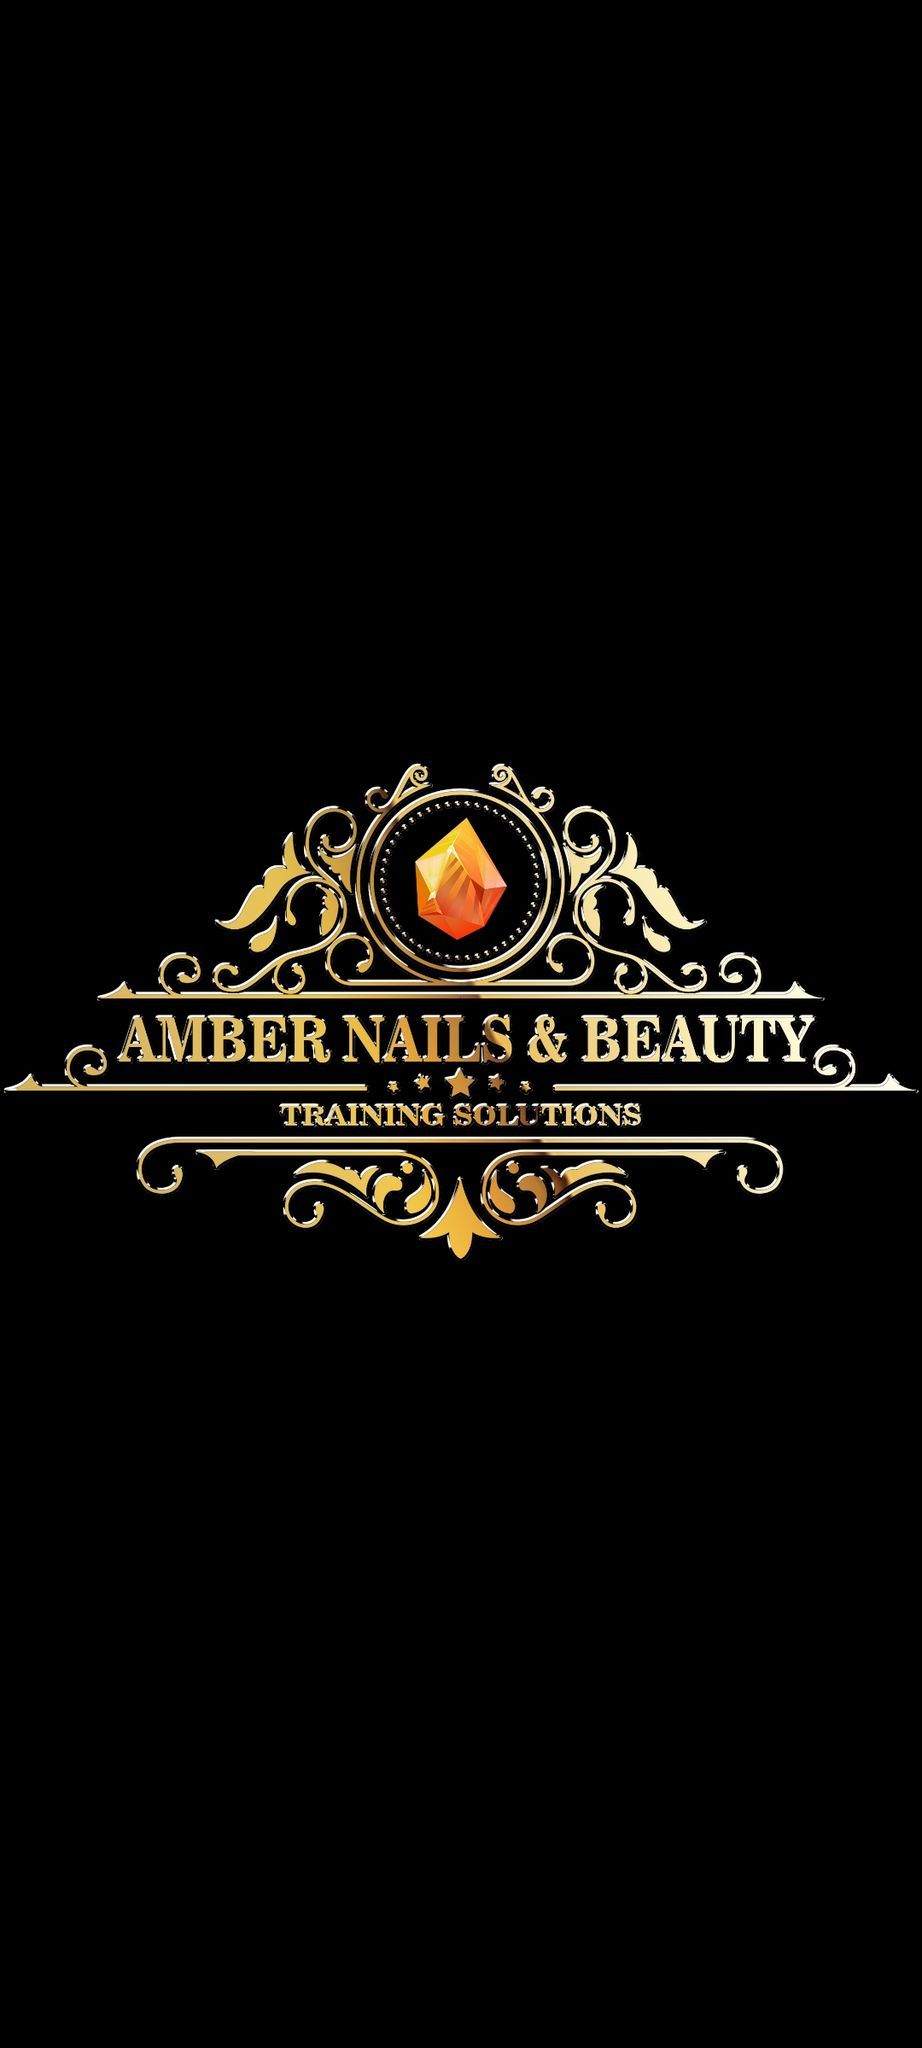 Professional Nail Forms \nTraining courses